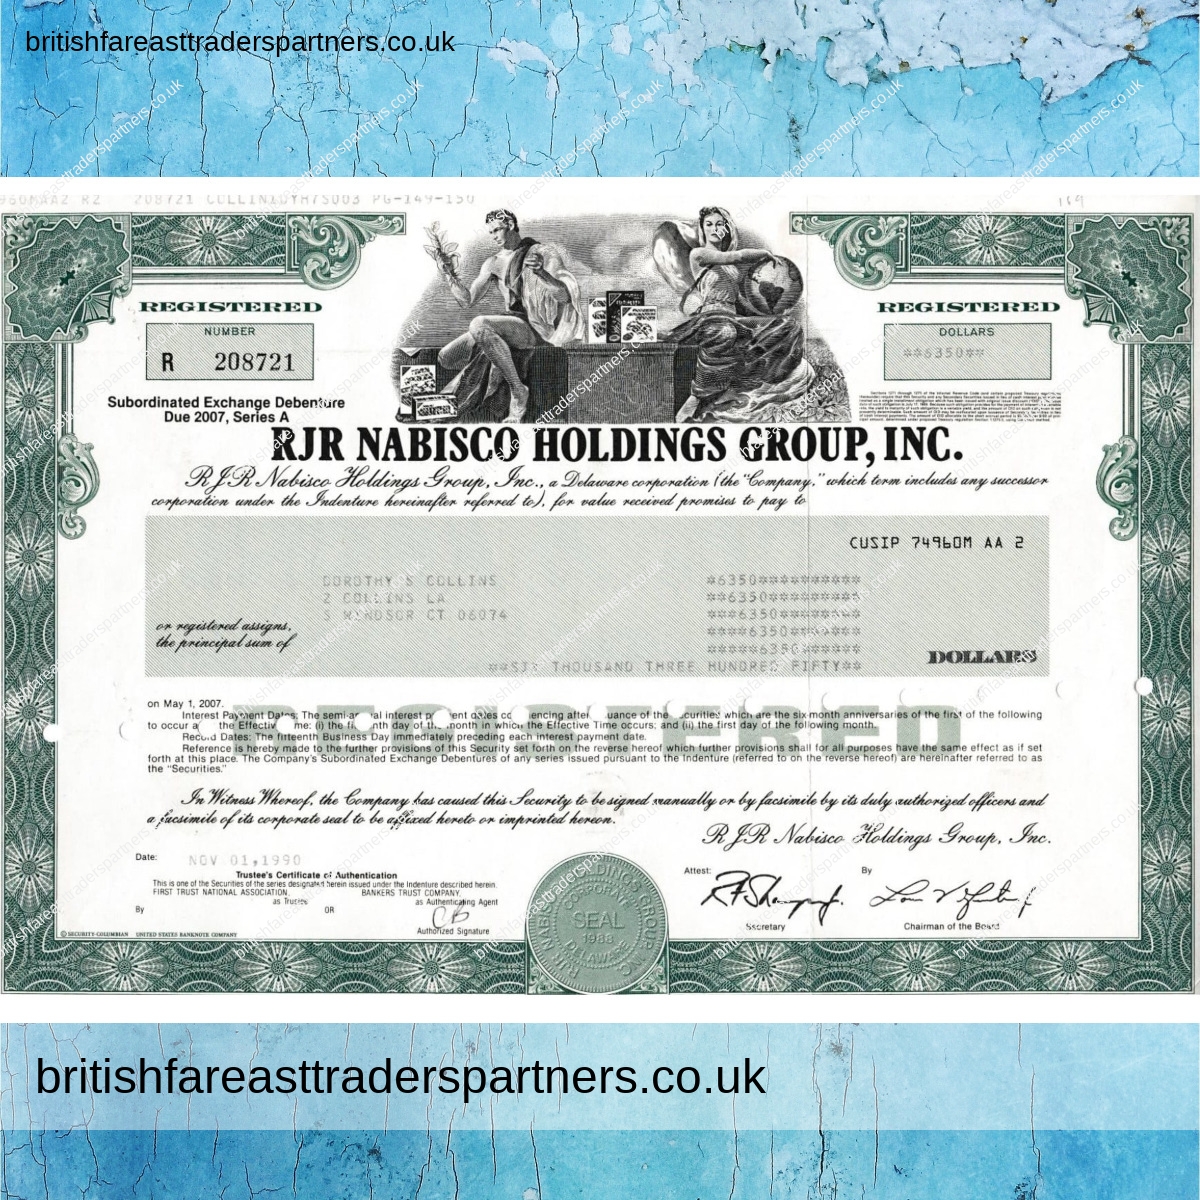 VINTAGE STOCK / SHARE CERTIFICATE REGISTERED DEBENTURE “RJR NABISCO HOLDINGS GROUP, INC.” COLLECTABLE DOCUMENTS |  SHARE CERTIFICATES | COMPANIES | WORLD | SCRIPOPHILY | BUSINESS | INVESTMENTS